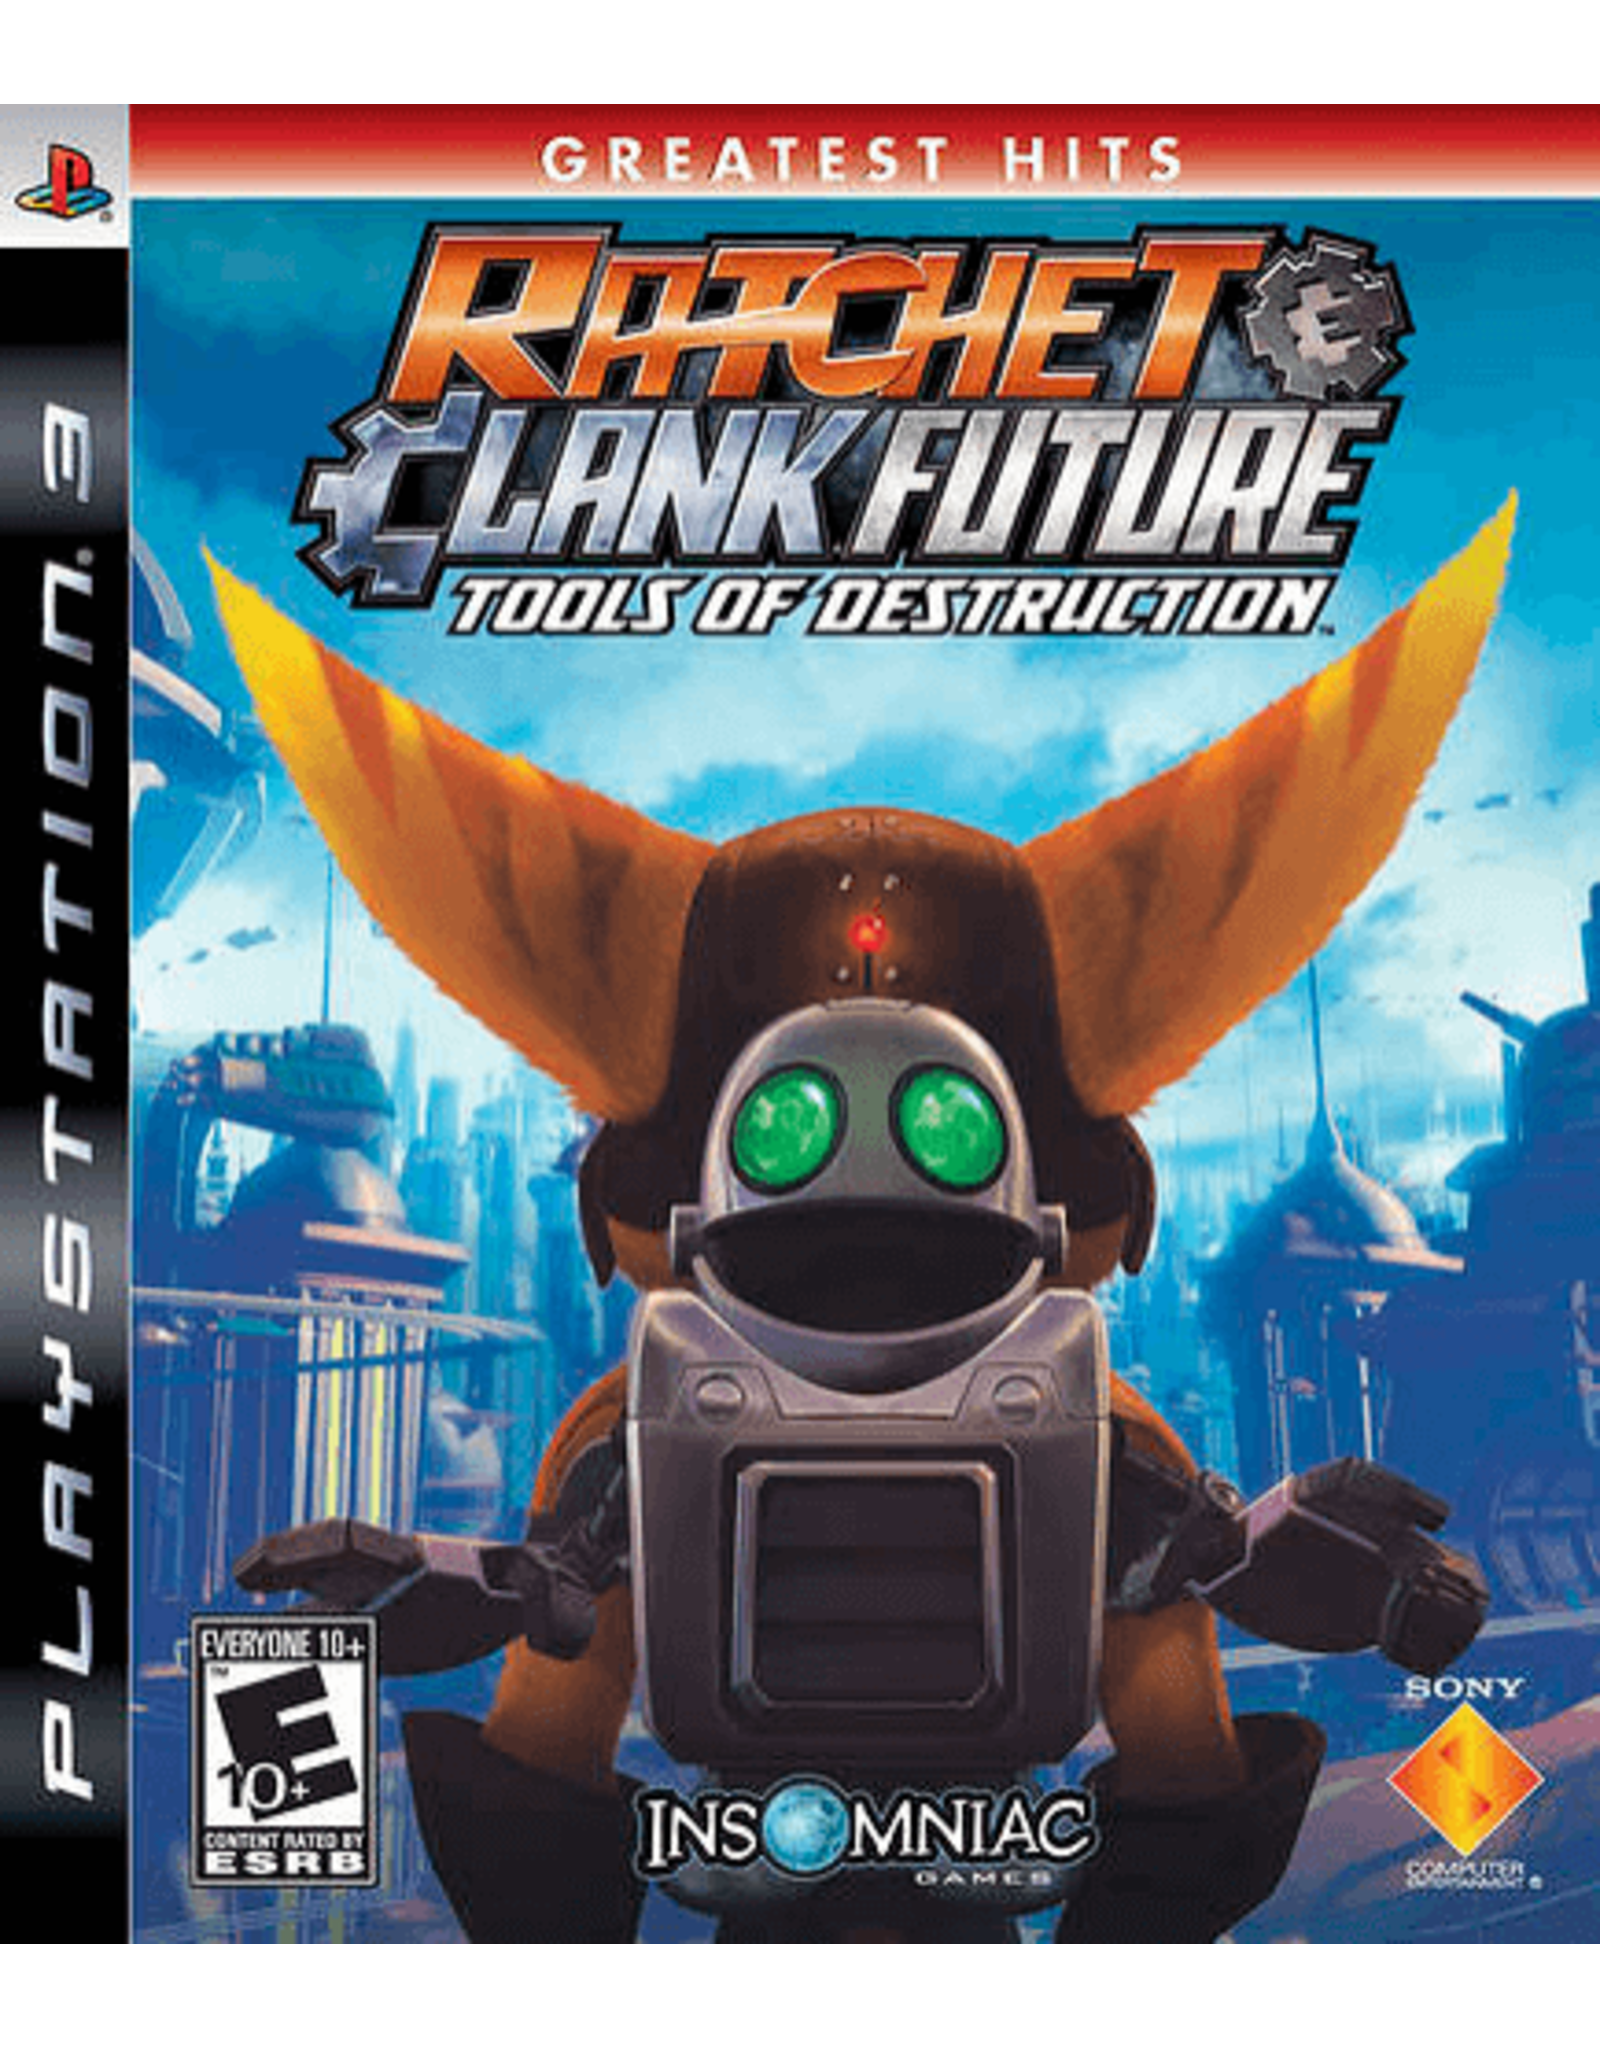 Playstation 3 Ratchet & Clank Future Tools of Destruction (Greatest Hits, Brand New)